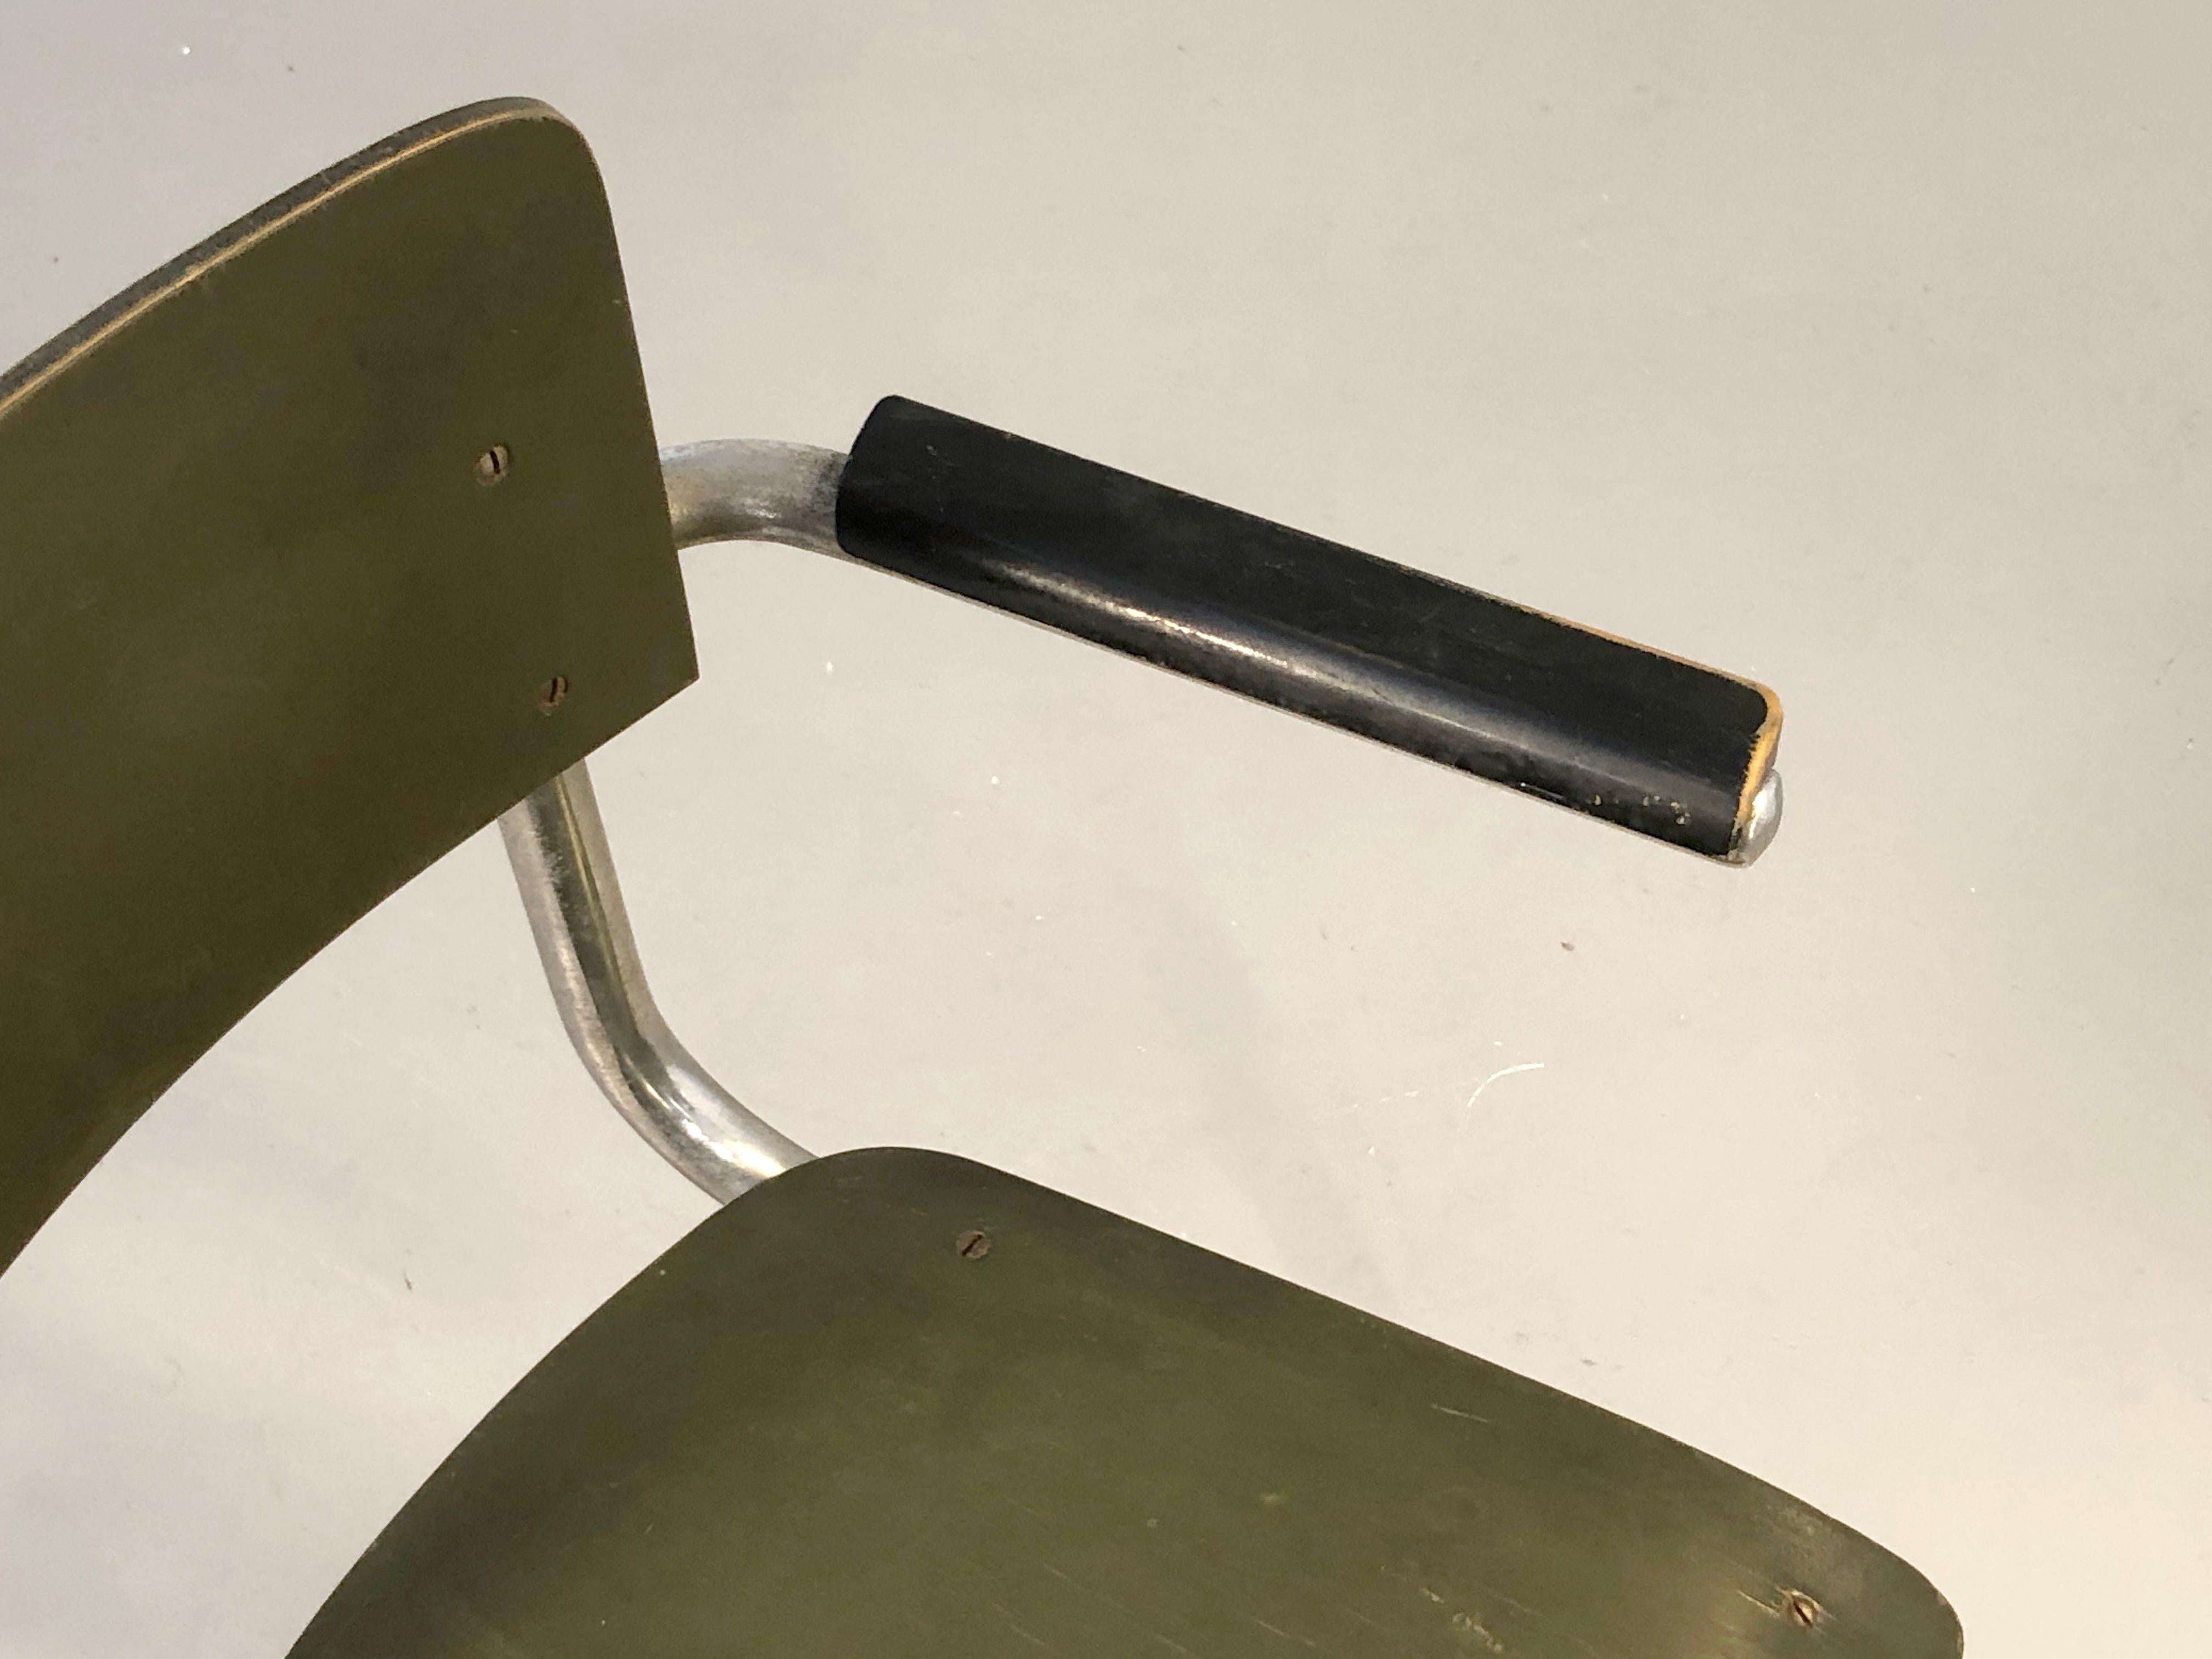 An Early MODERNIST BAUHAUS CHAIR by MART STAM for MAUSER WERKE, Germany 1930 For Sale 8